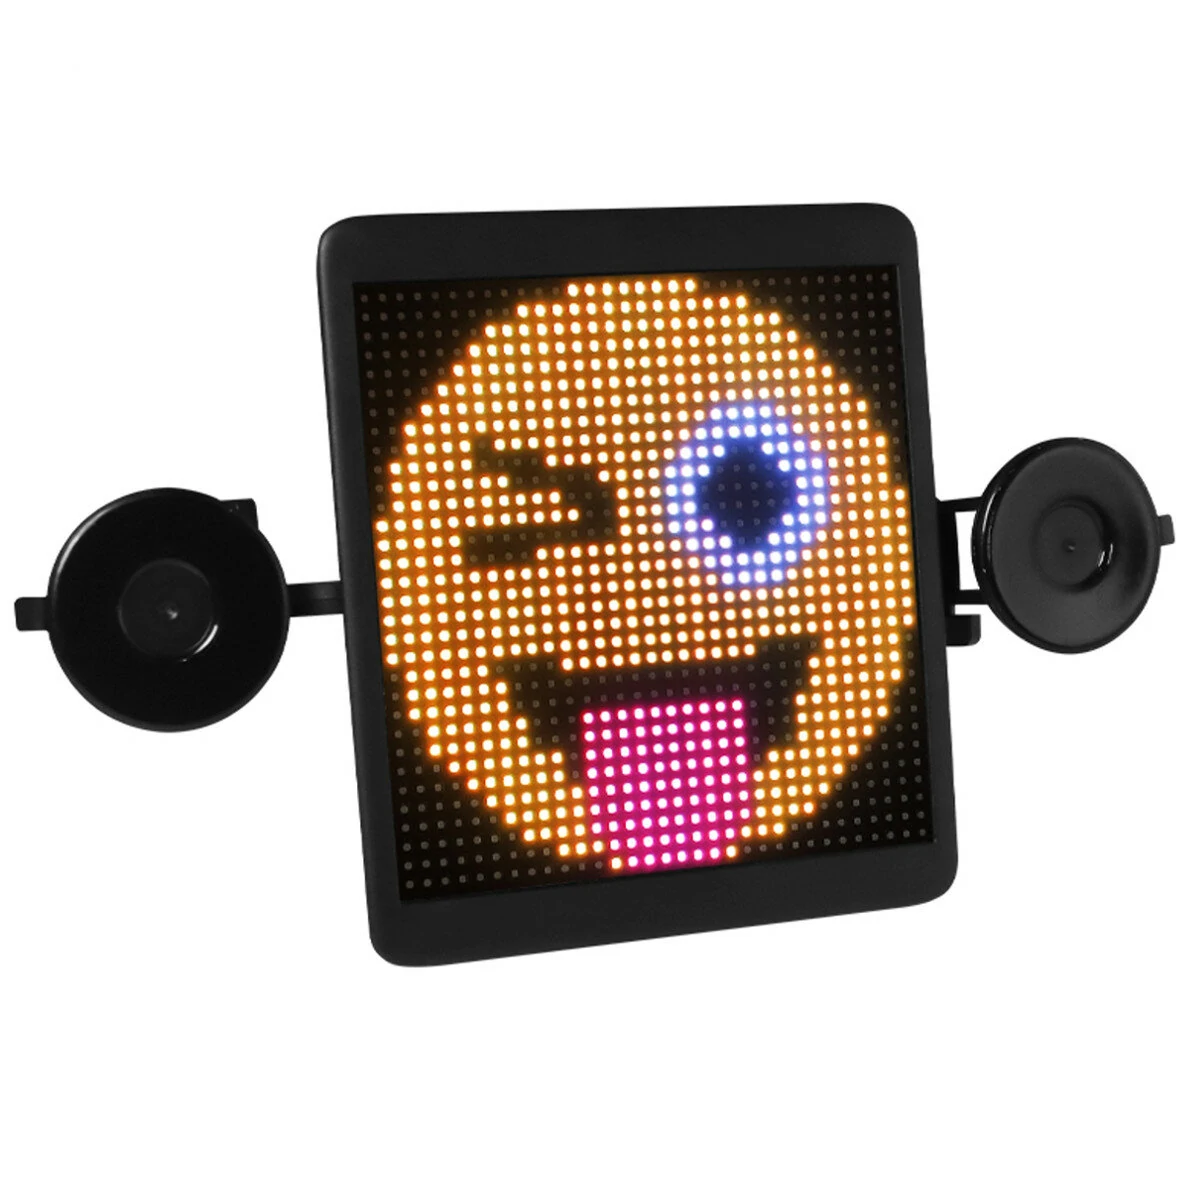 Hi.groom interactive car led screen voice assistant portable animated emojis innovative design windshield mount bluetooth control advertising creative lights